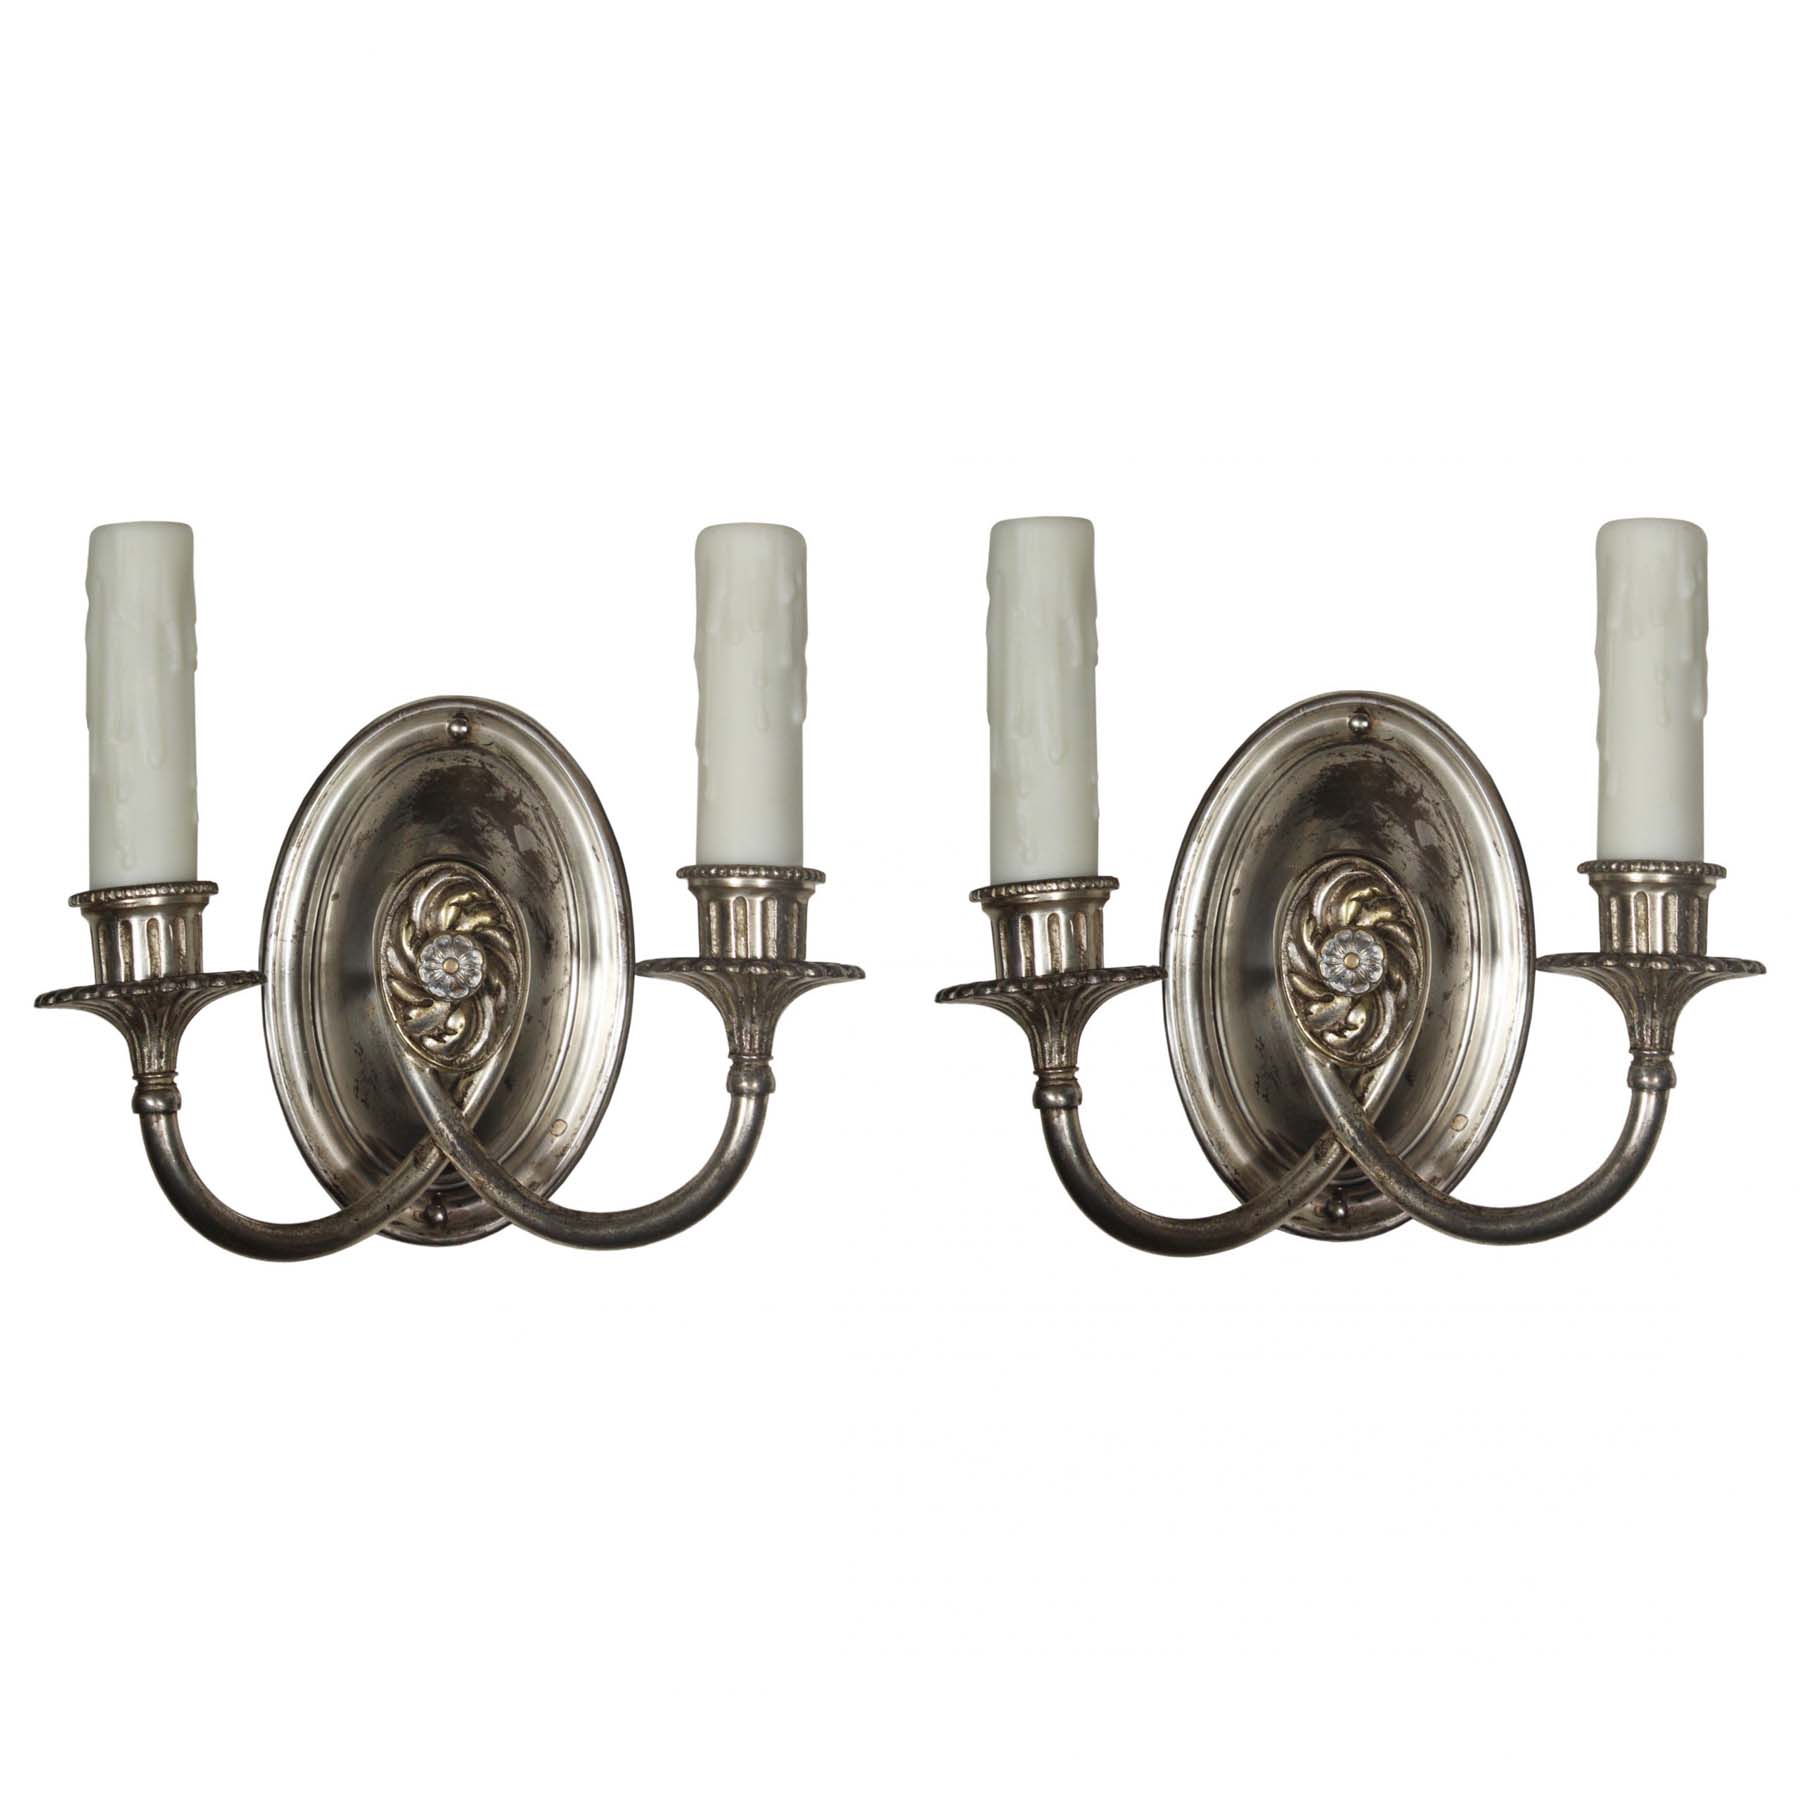 SOLD Pair of Silver Plated Double-Arm Sconces, Antique Lighting-0